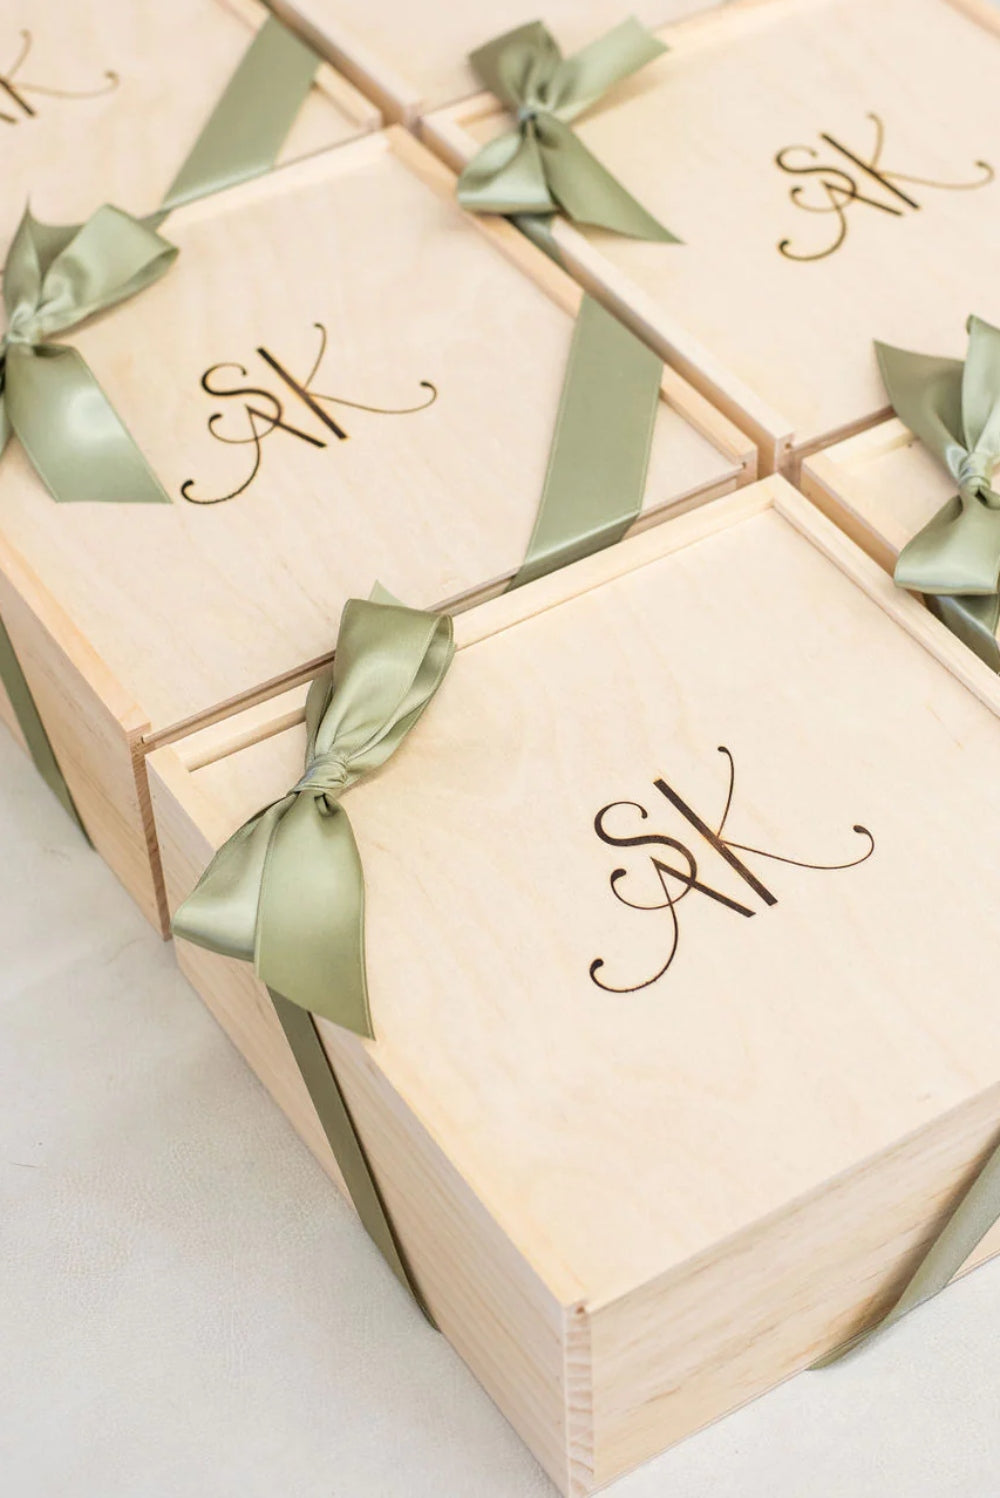 Custom wedding welcome gifts with monogram detail for out of town guests, Marcy Blume Wedding, by Marigold Grey